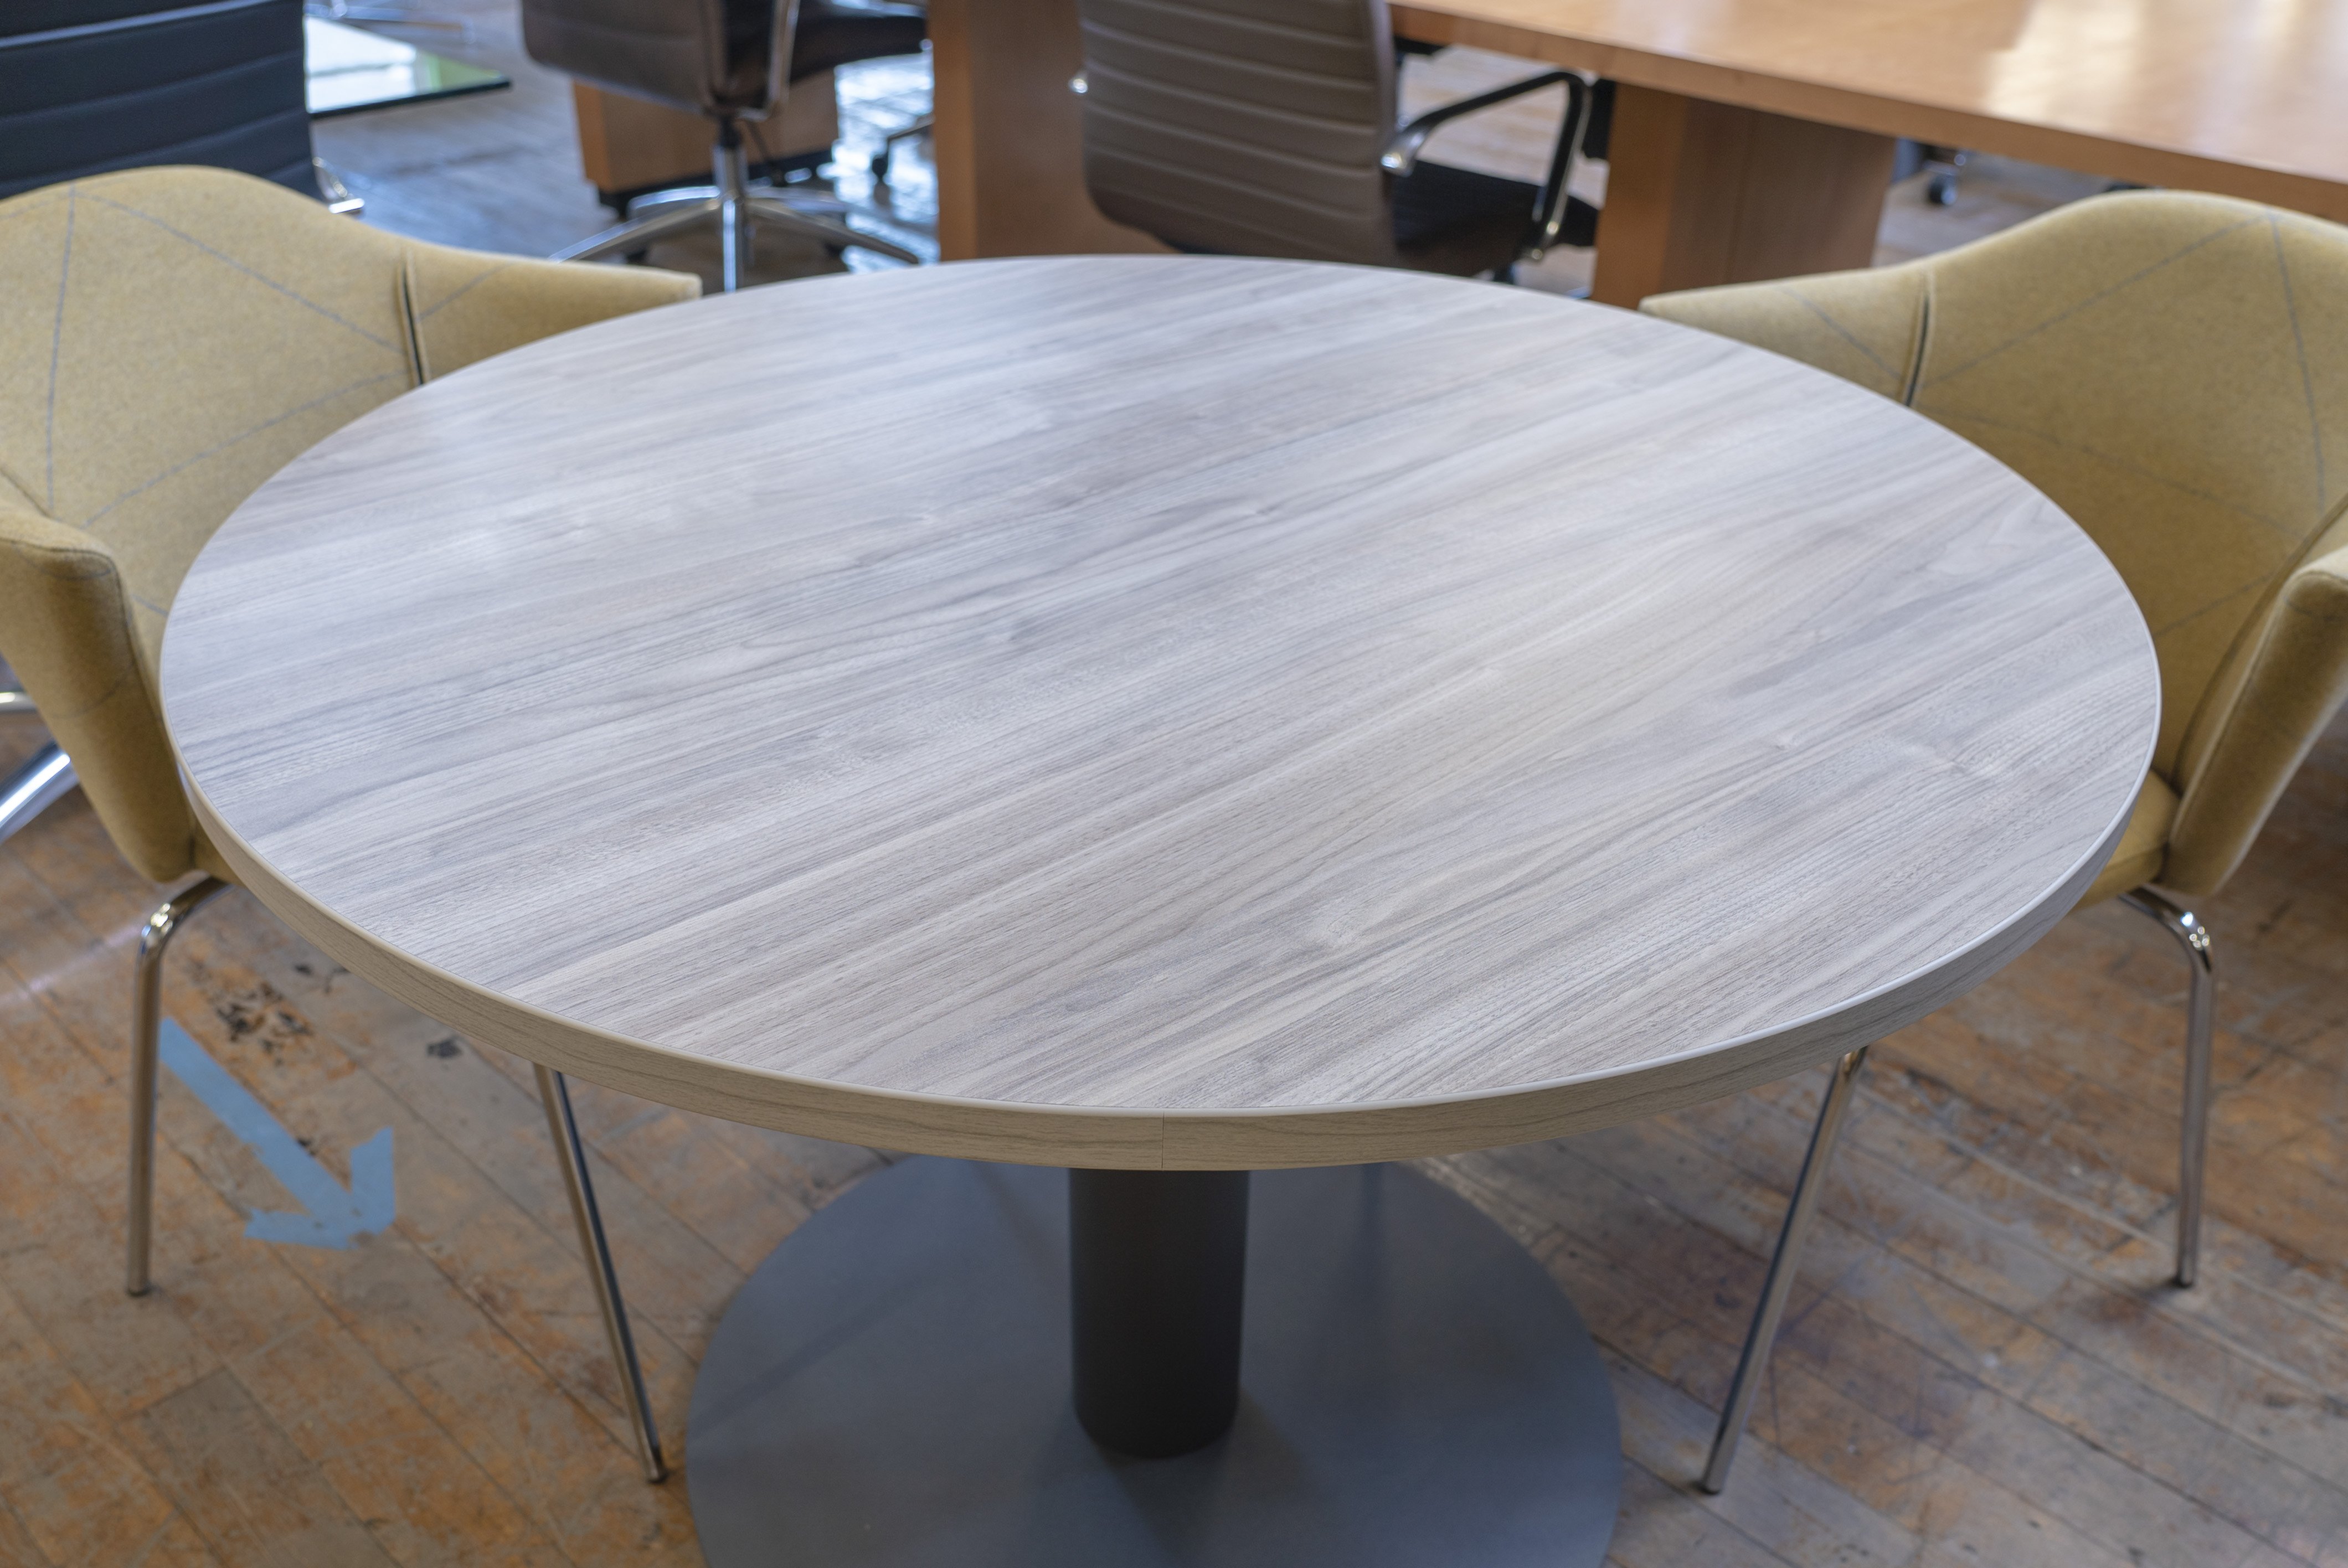 steelcase-42-laminate-round-meeting-table